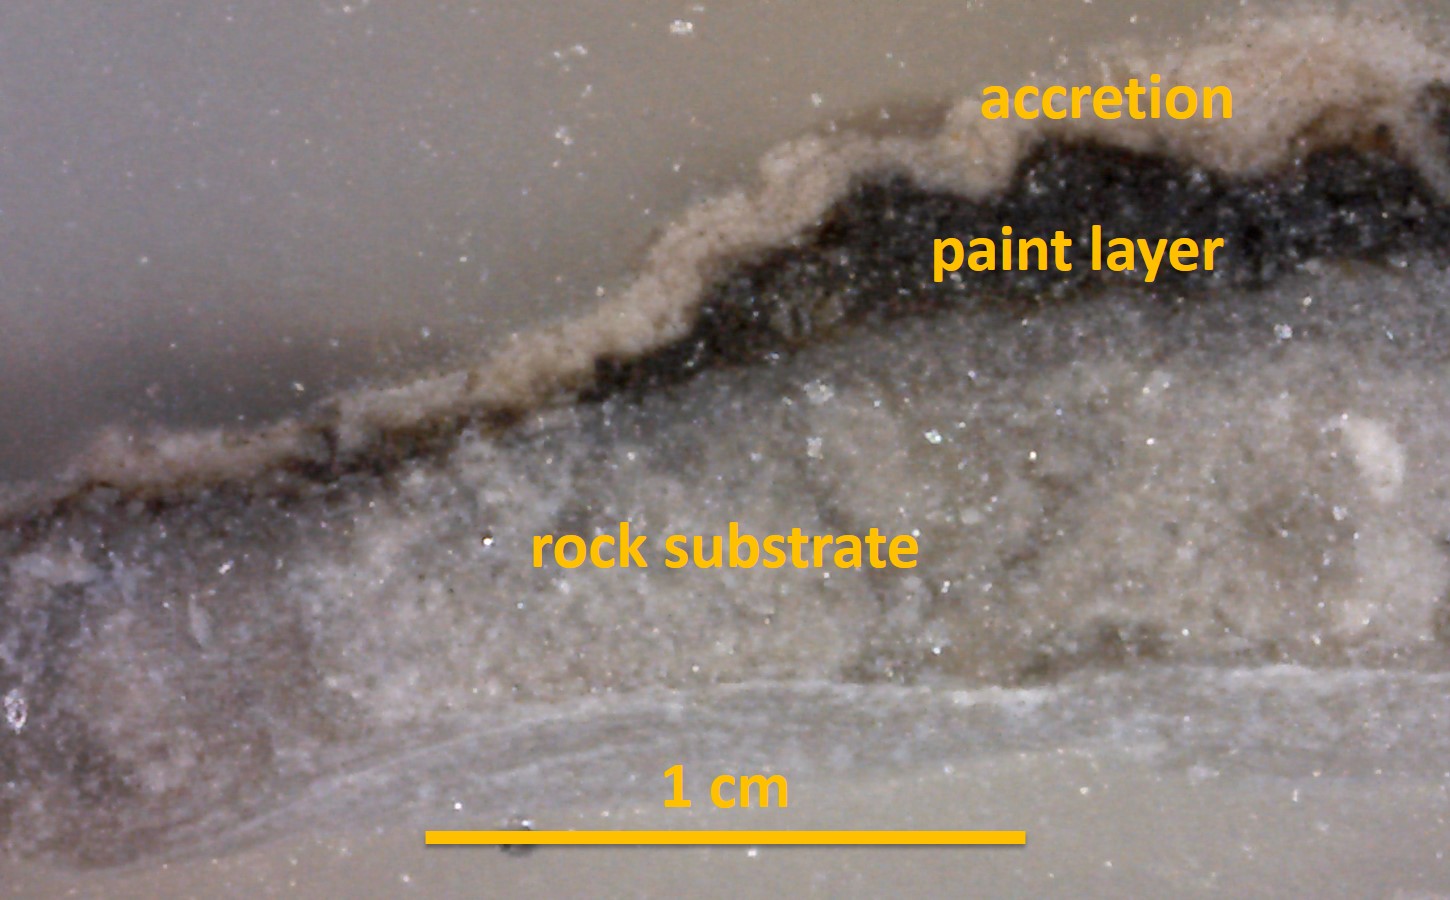 This thin paint flake was embedded in resin, sliced, and polished so that we can see the paint layer in profile or cross-section. You can see the thin, vibrant paint layer with an accretion coating. Oftentimes, when we look at painted shelter walls, the paintings appear “faded”, but the mineral pigment is as vibrant as it always has been, it is just obscured by this mineral accretion.